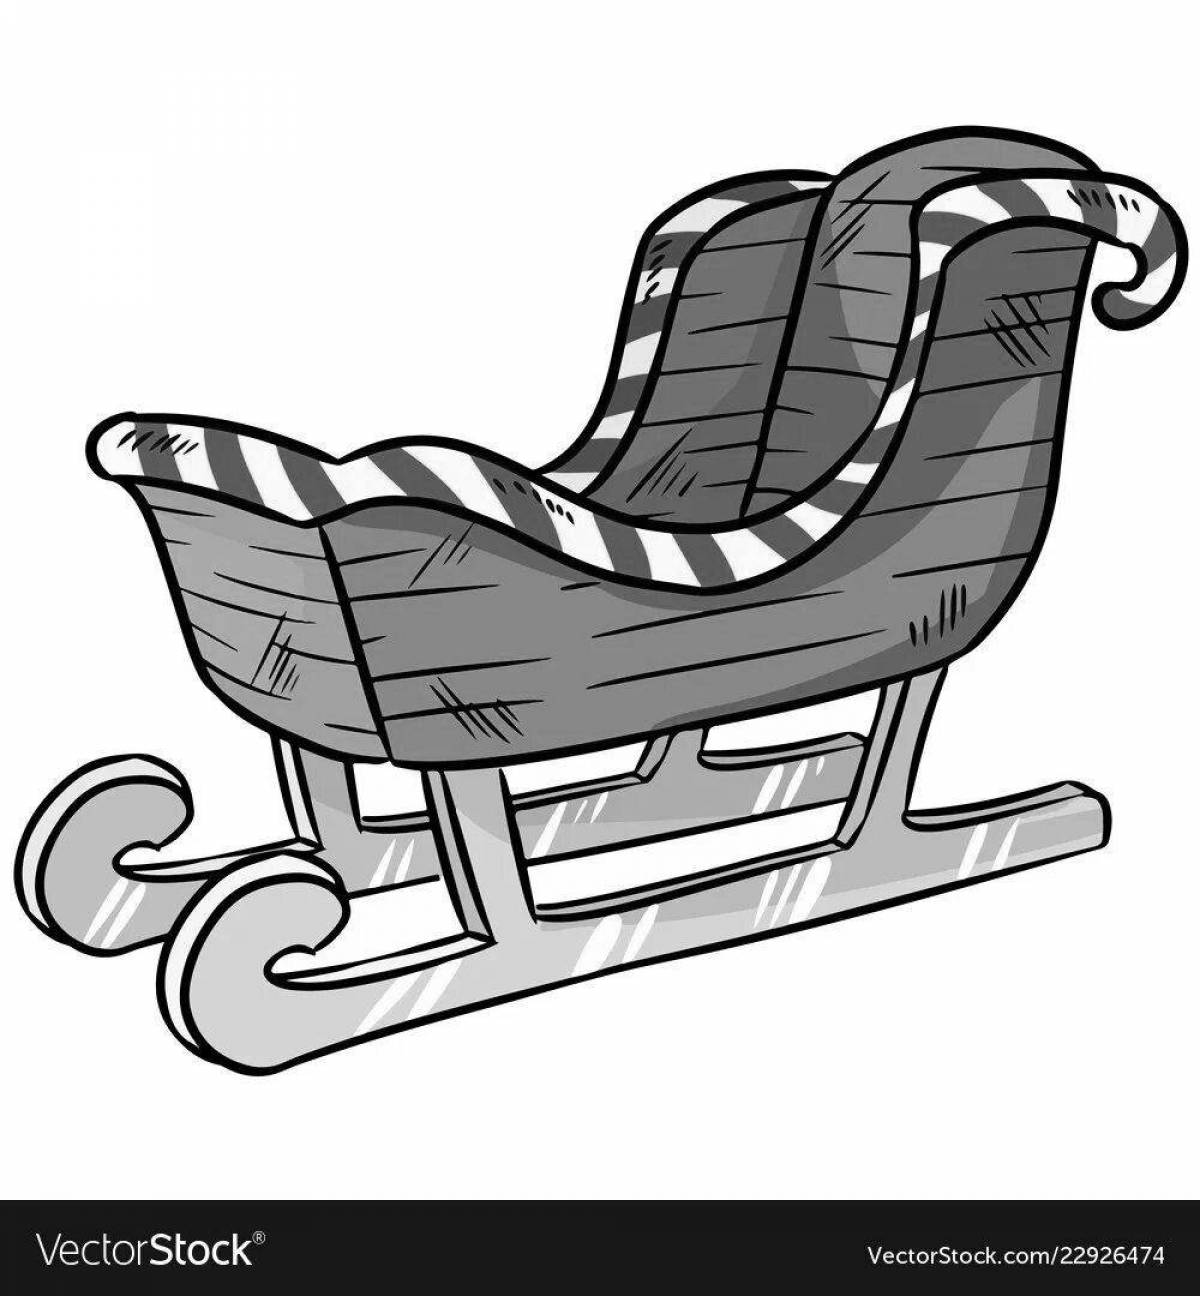 Shiny Sleigh Coloring Page for Toddlers